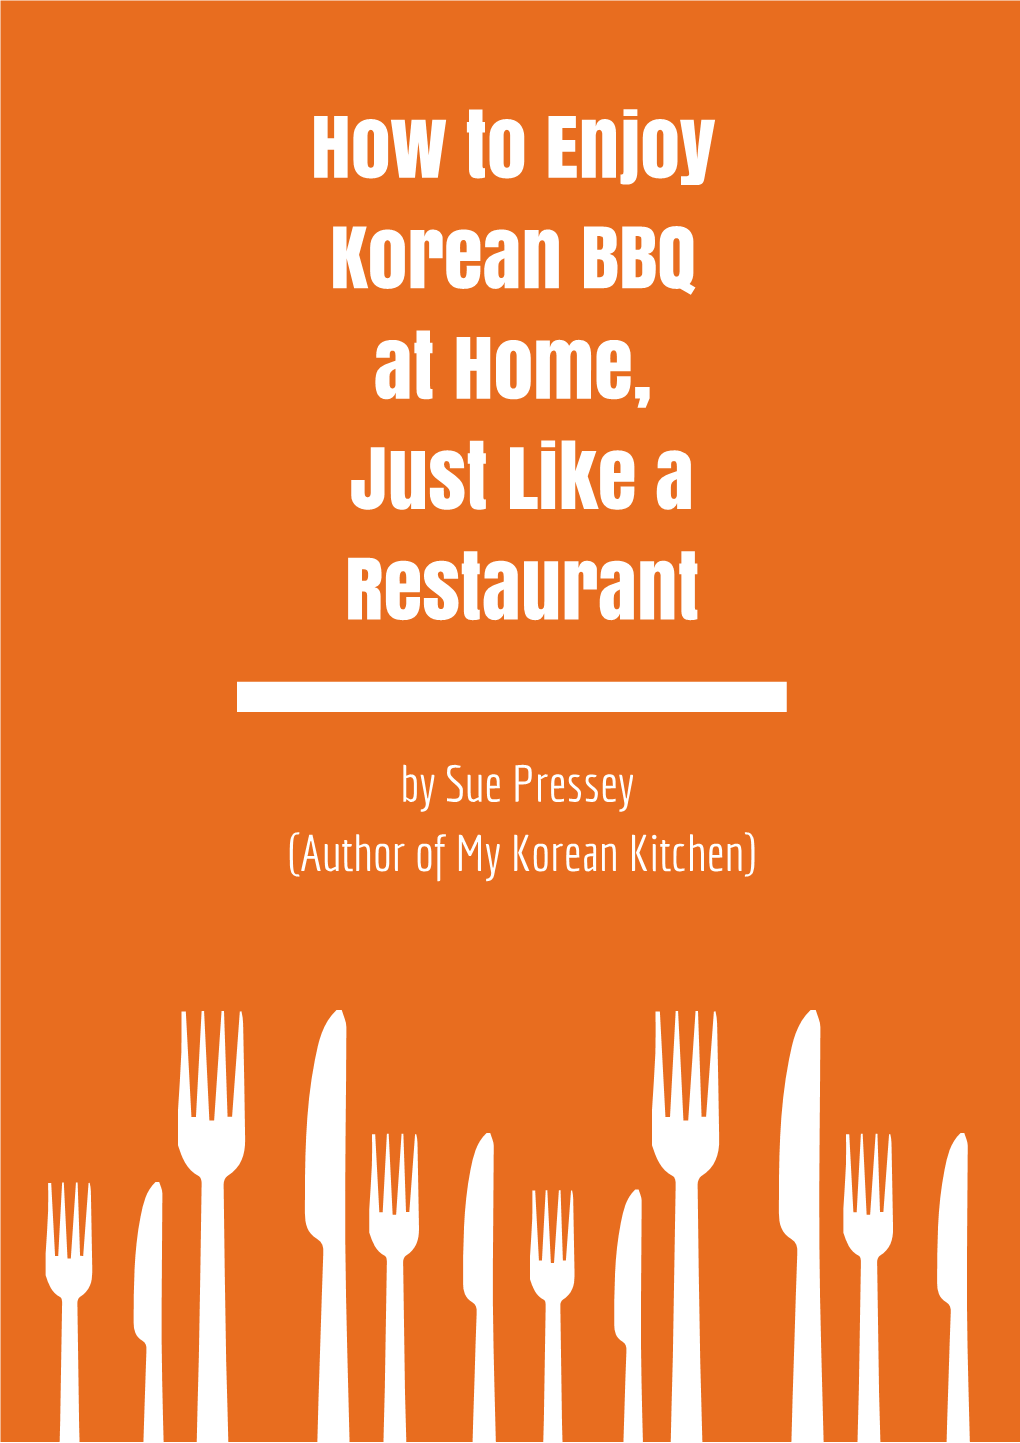 How to Enjoy Korean BBQ at Home, Just Like a Restaurant